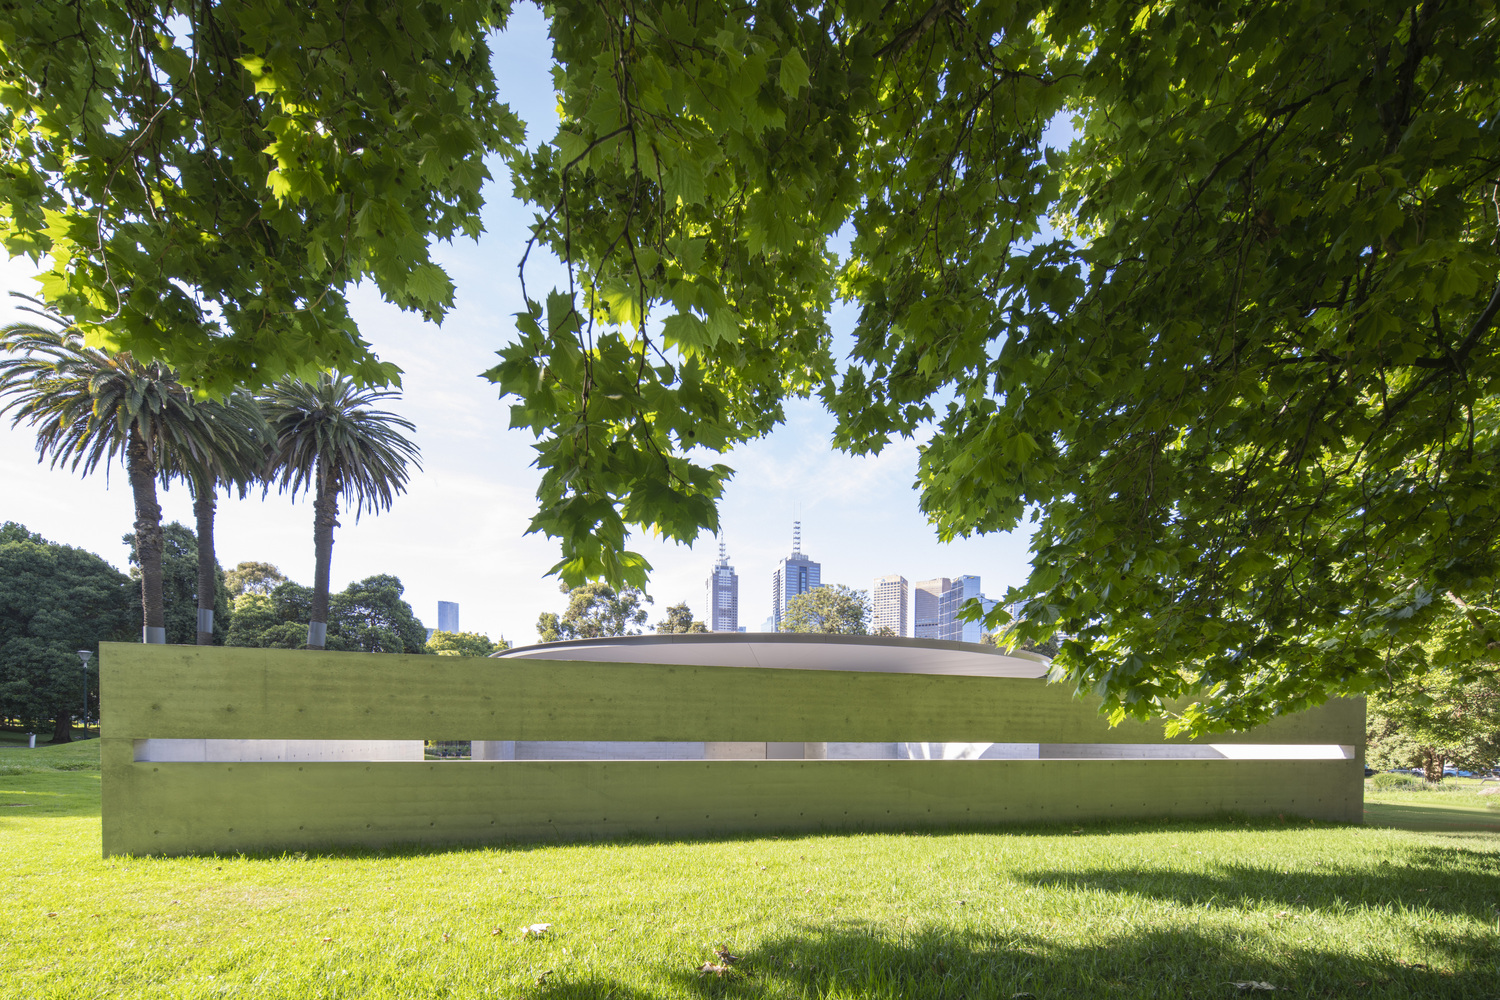 designed-by-tadao-ando-mpavilion-10-opens-in-melbo 